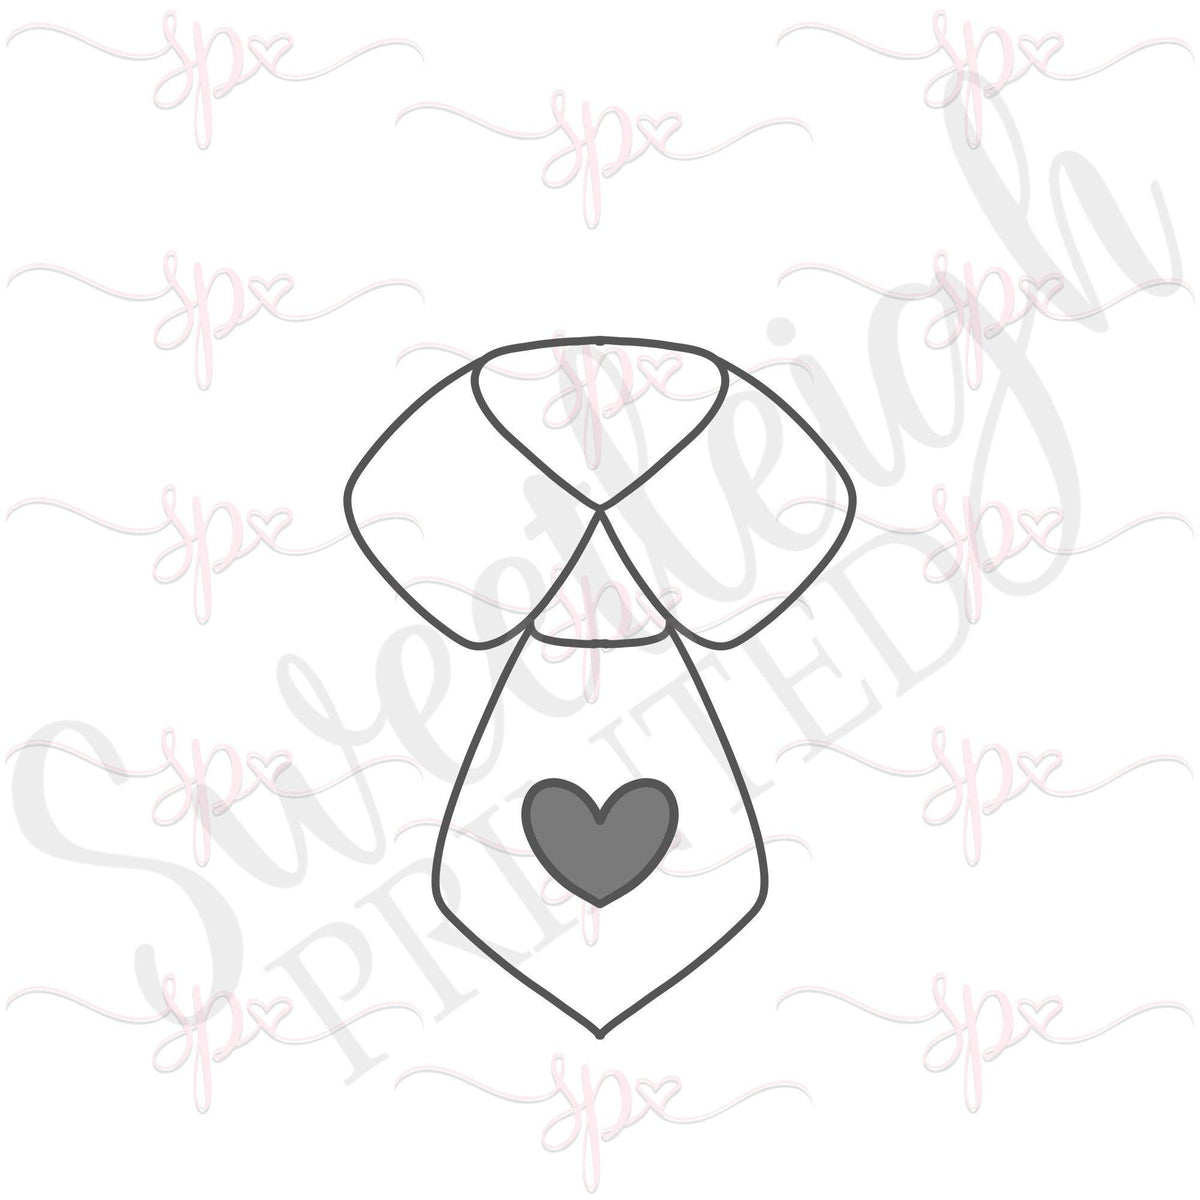 Chubby Collar and Tie Cookie Cutter - Sweetleigh 